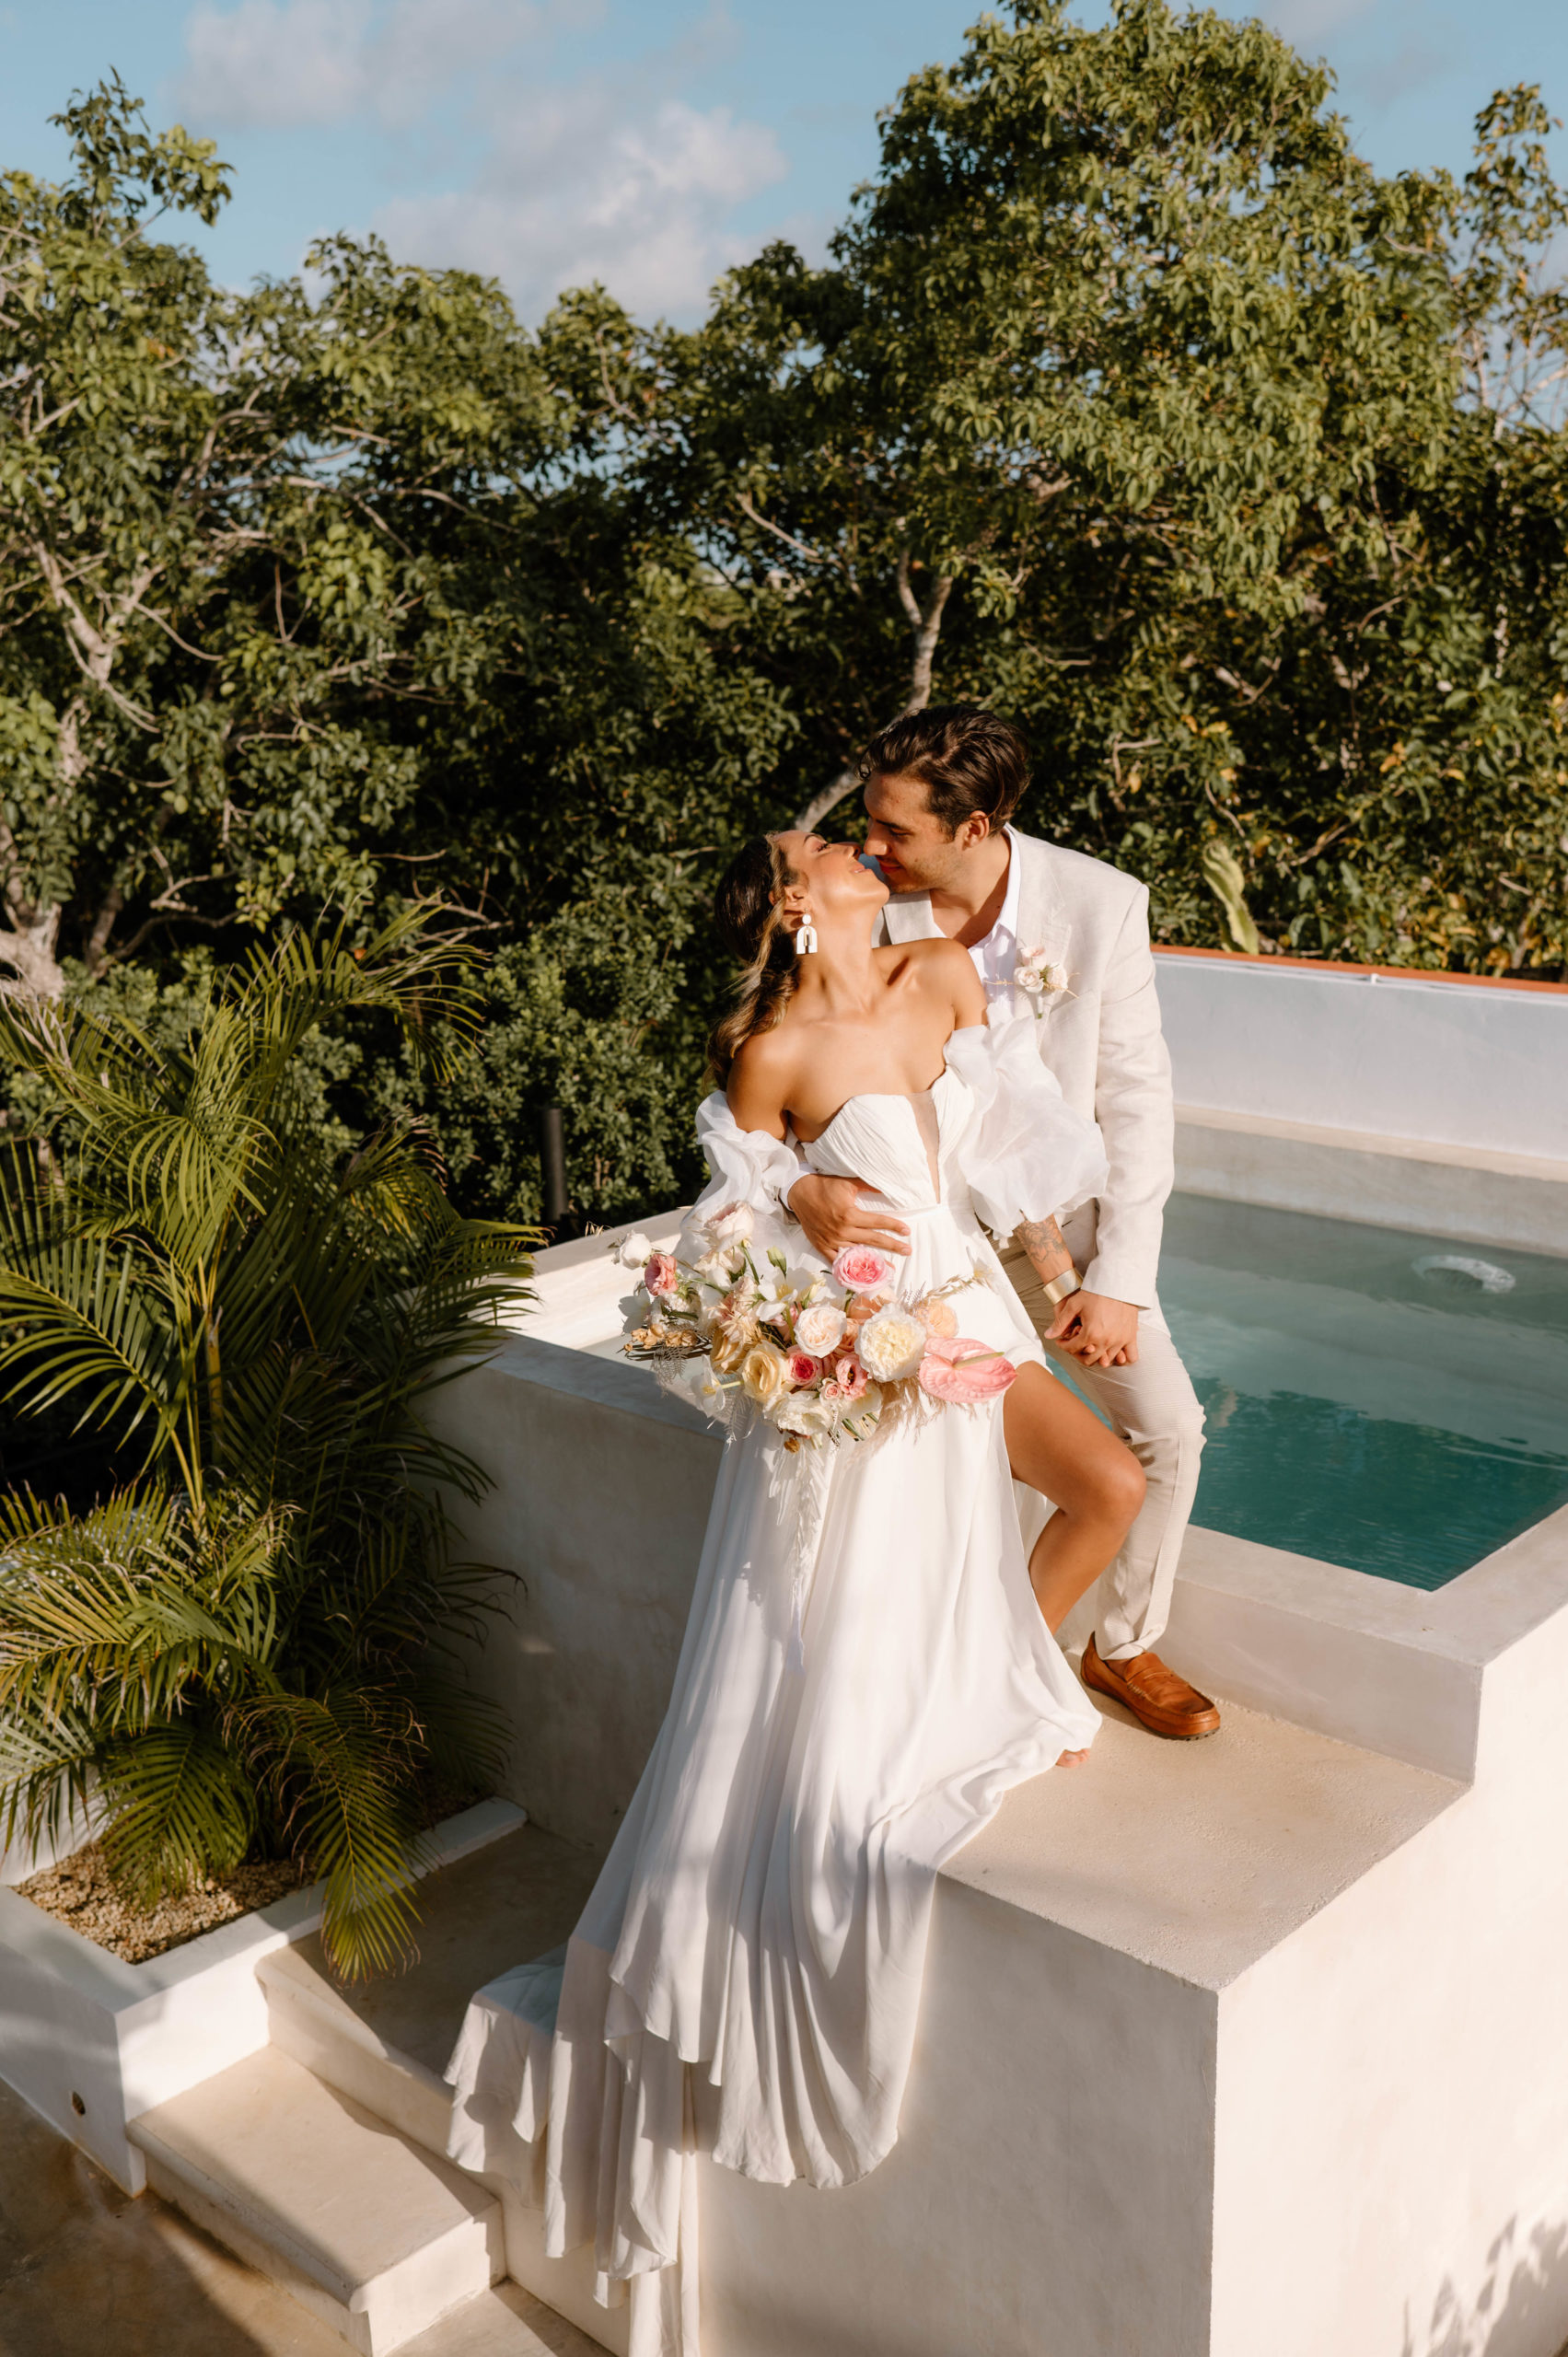 Planning an Airbnb wedding in Tulum, Mexico.